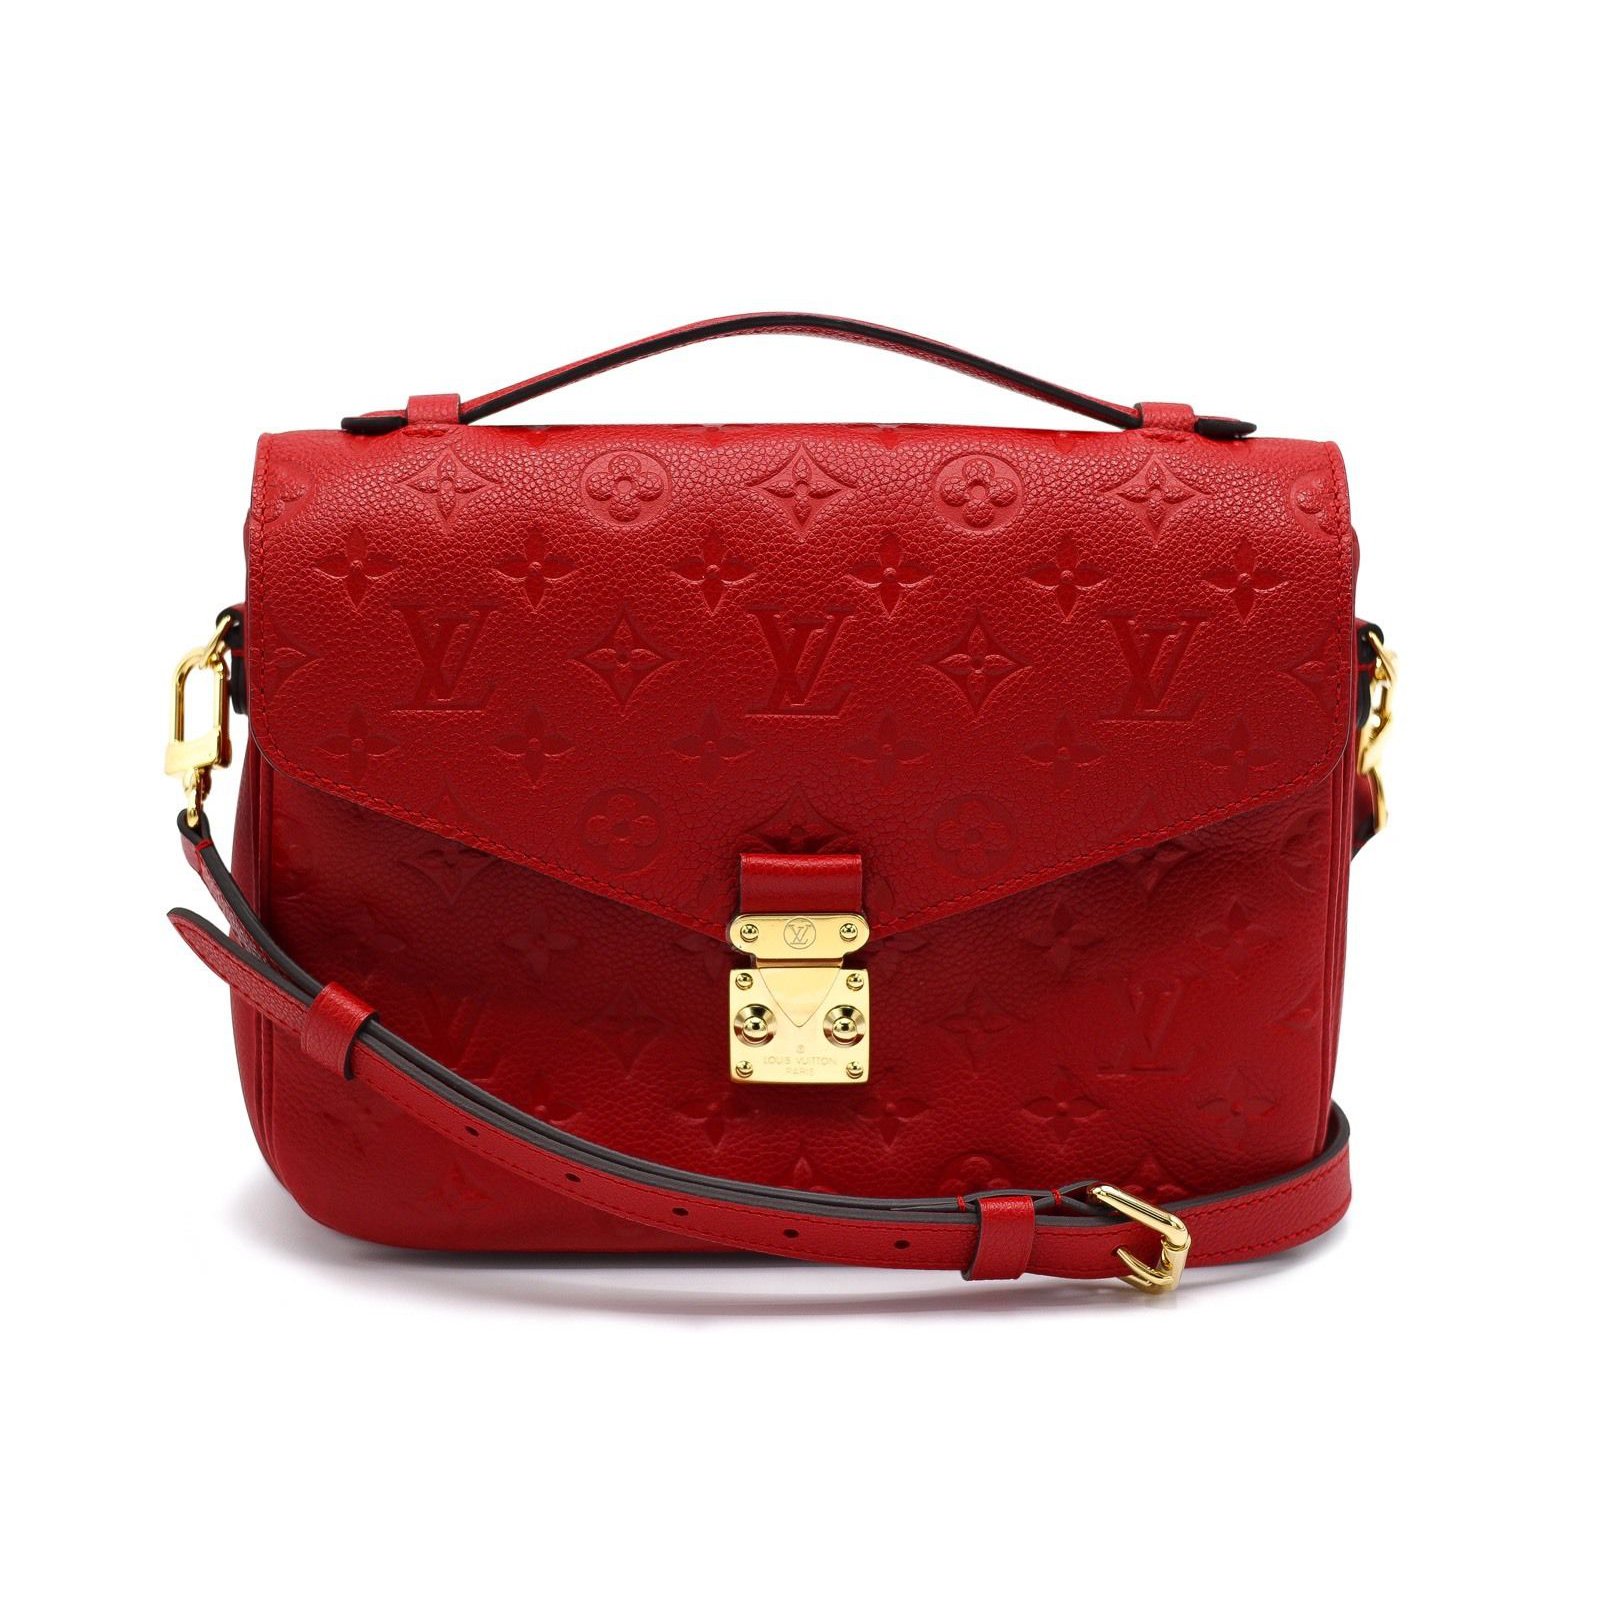 Louis Vuitton Red Purse Price | Confederated Tribes of the Umatilla Indian Reservation